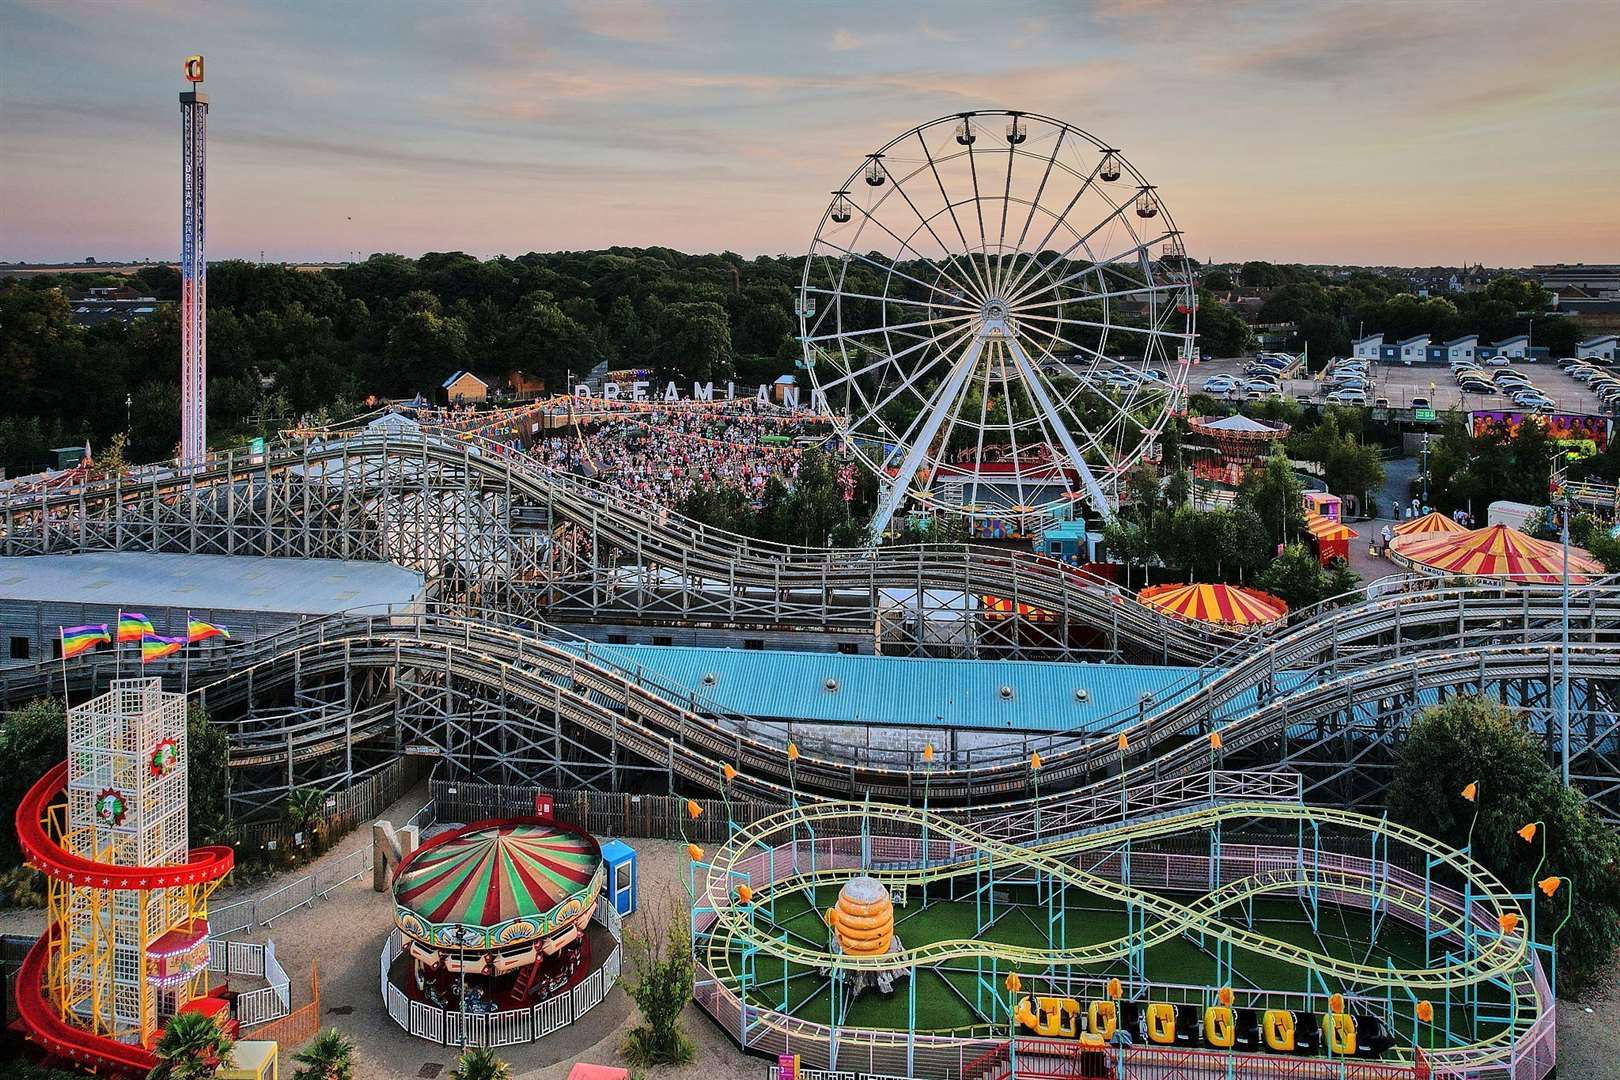 Dreamland today is back in style...but it can't quite hold a candle to its glory days. Picture: Dreamland